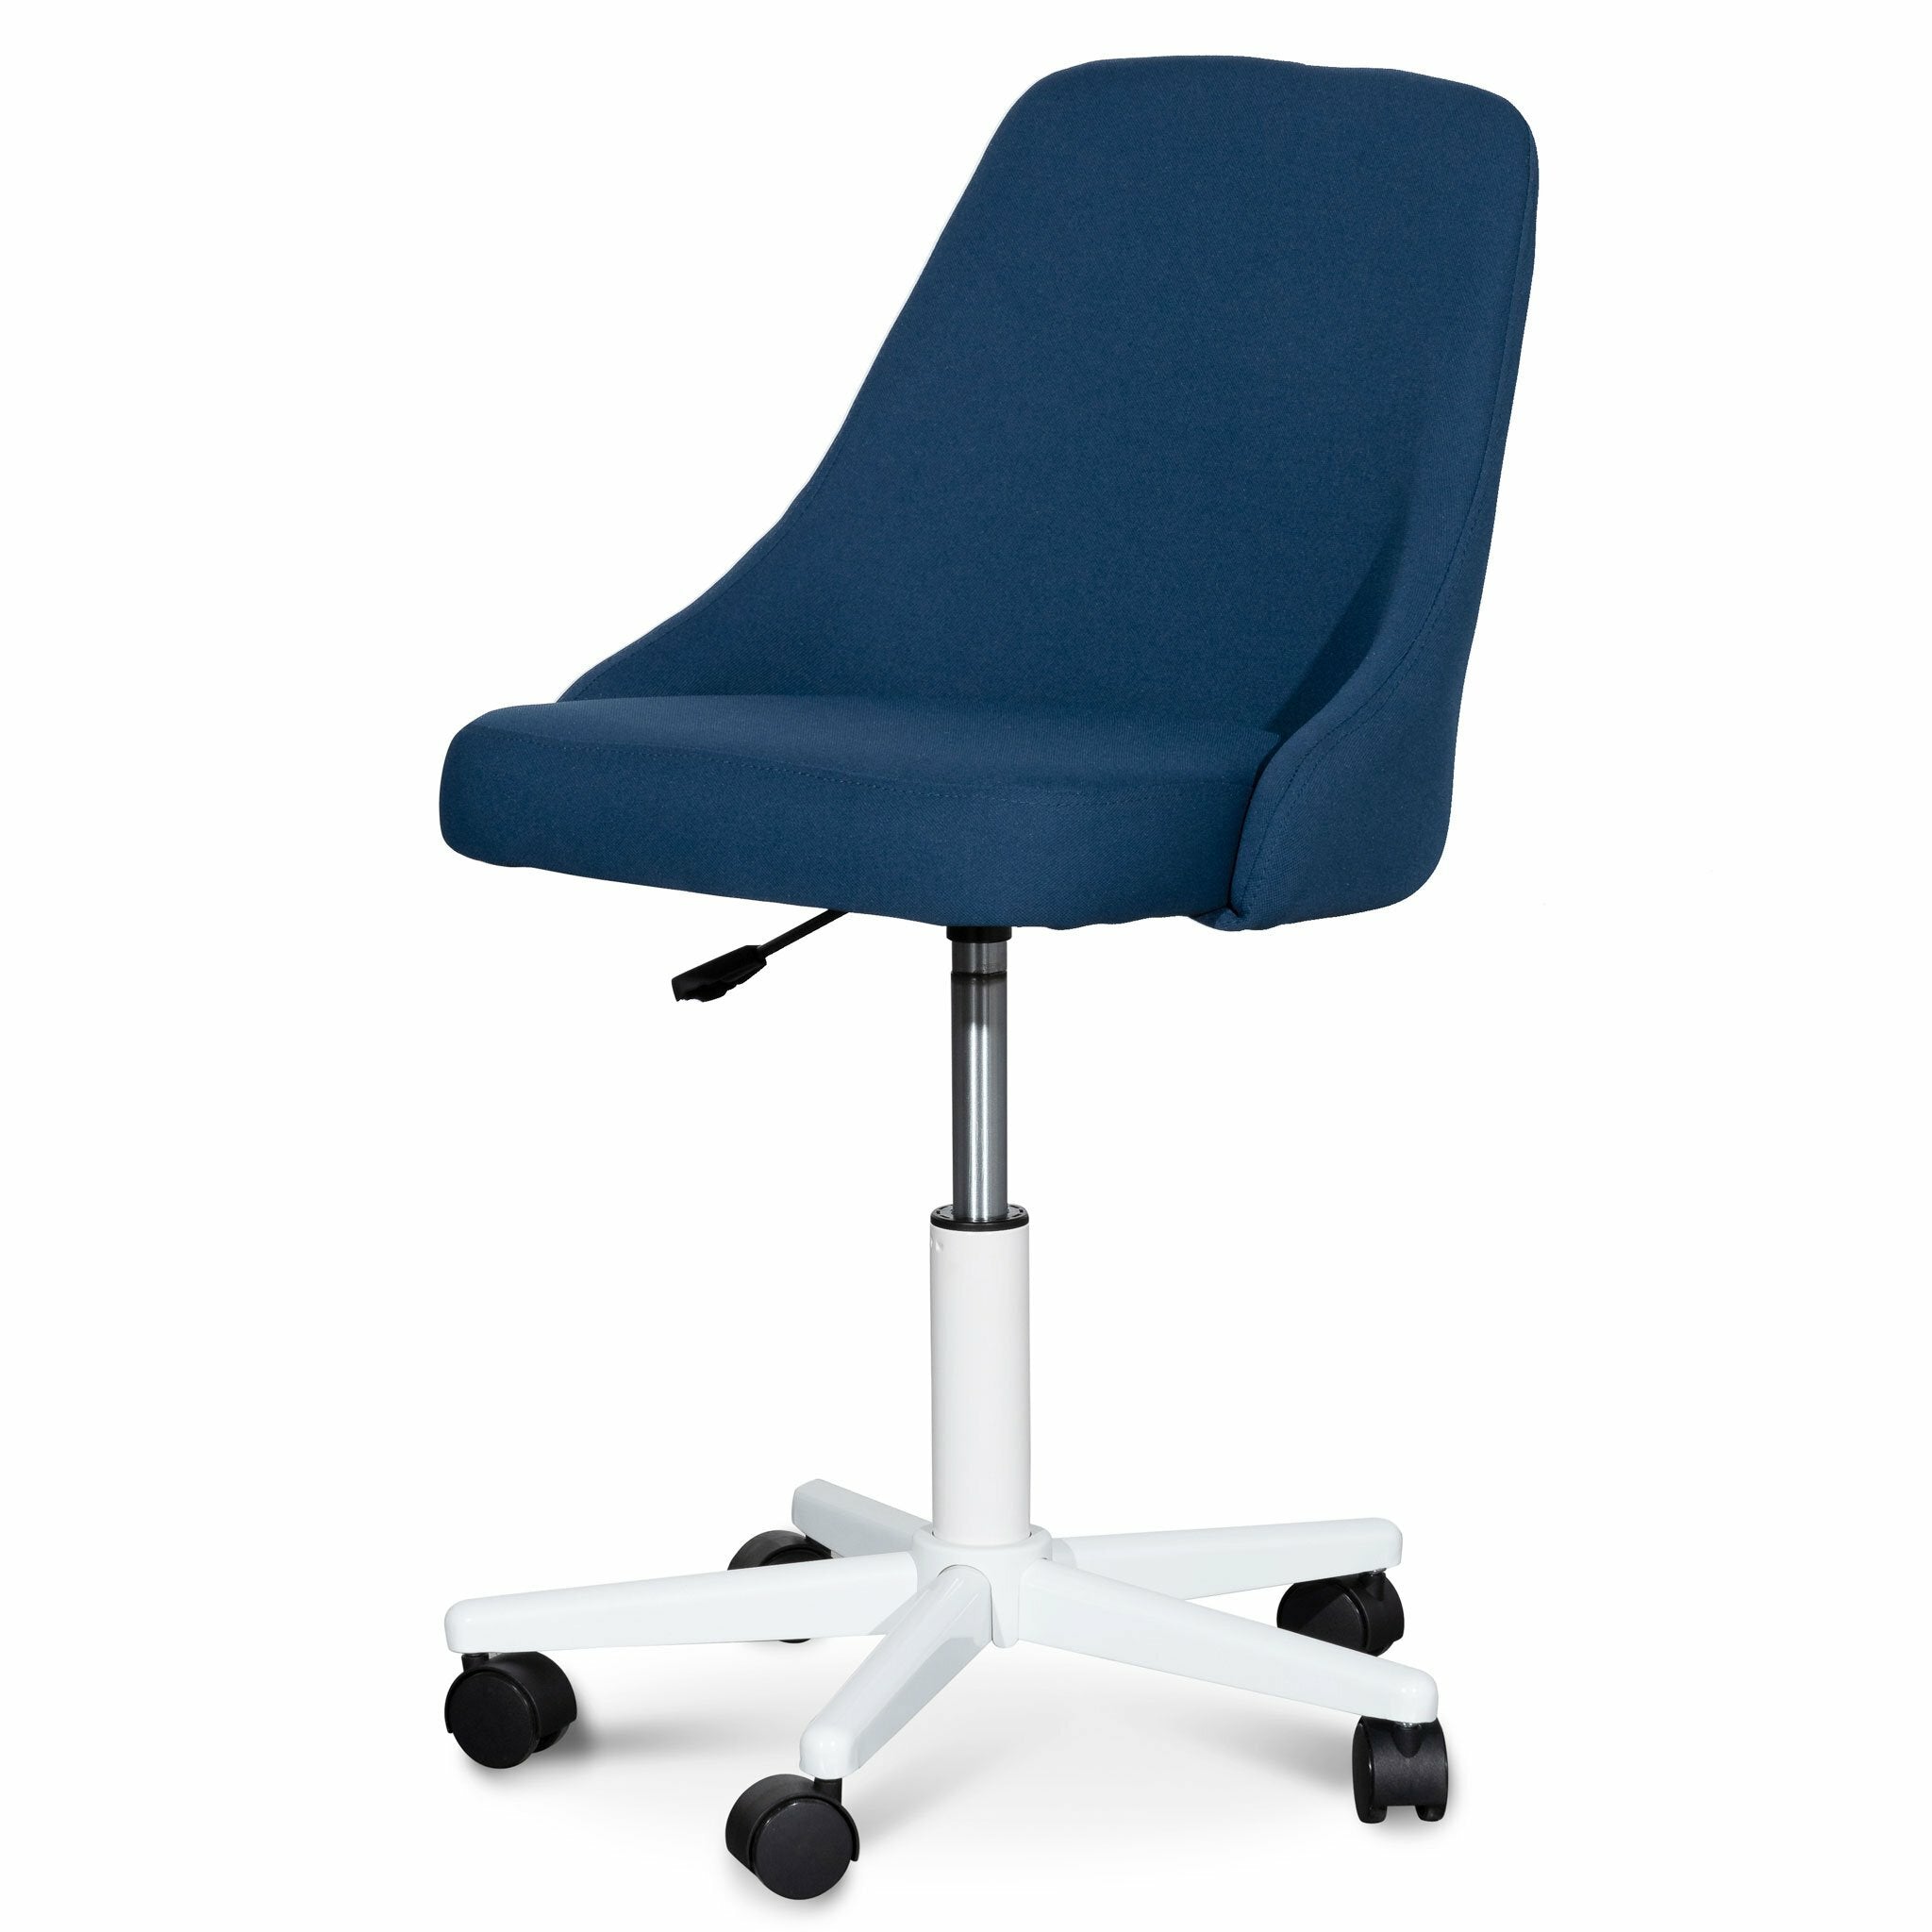 Ernesto Space Blue Fabric Office Chair - White Base